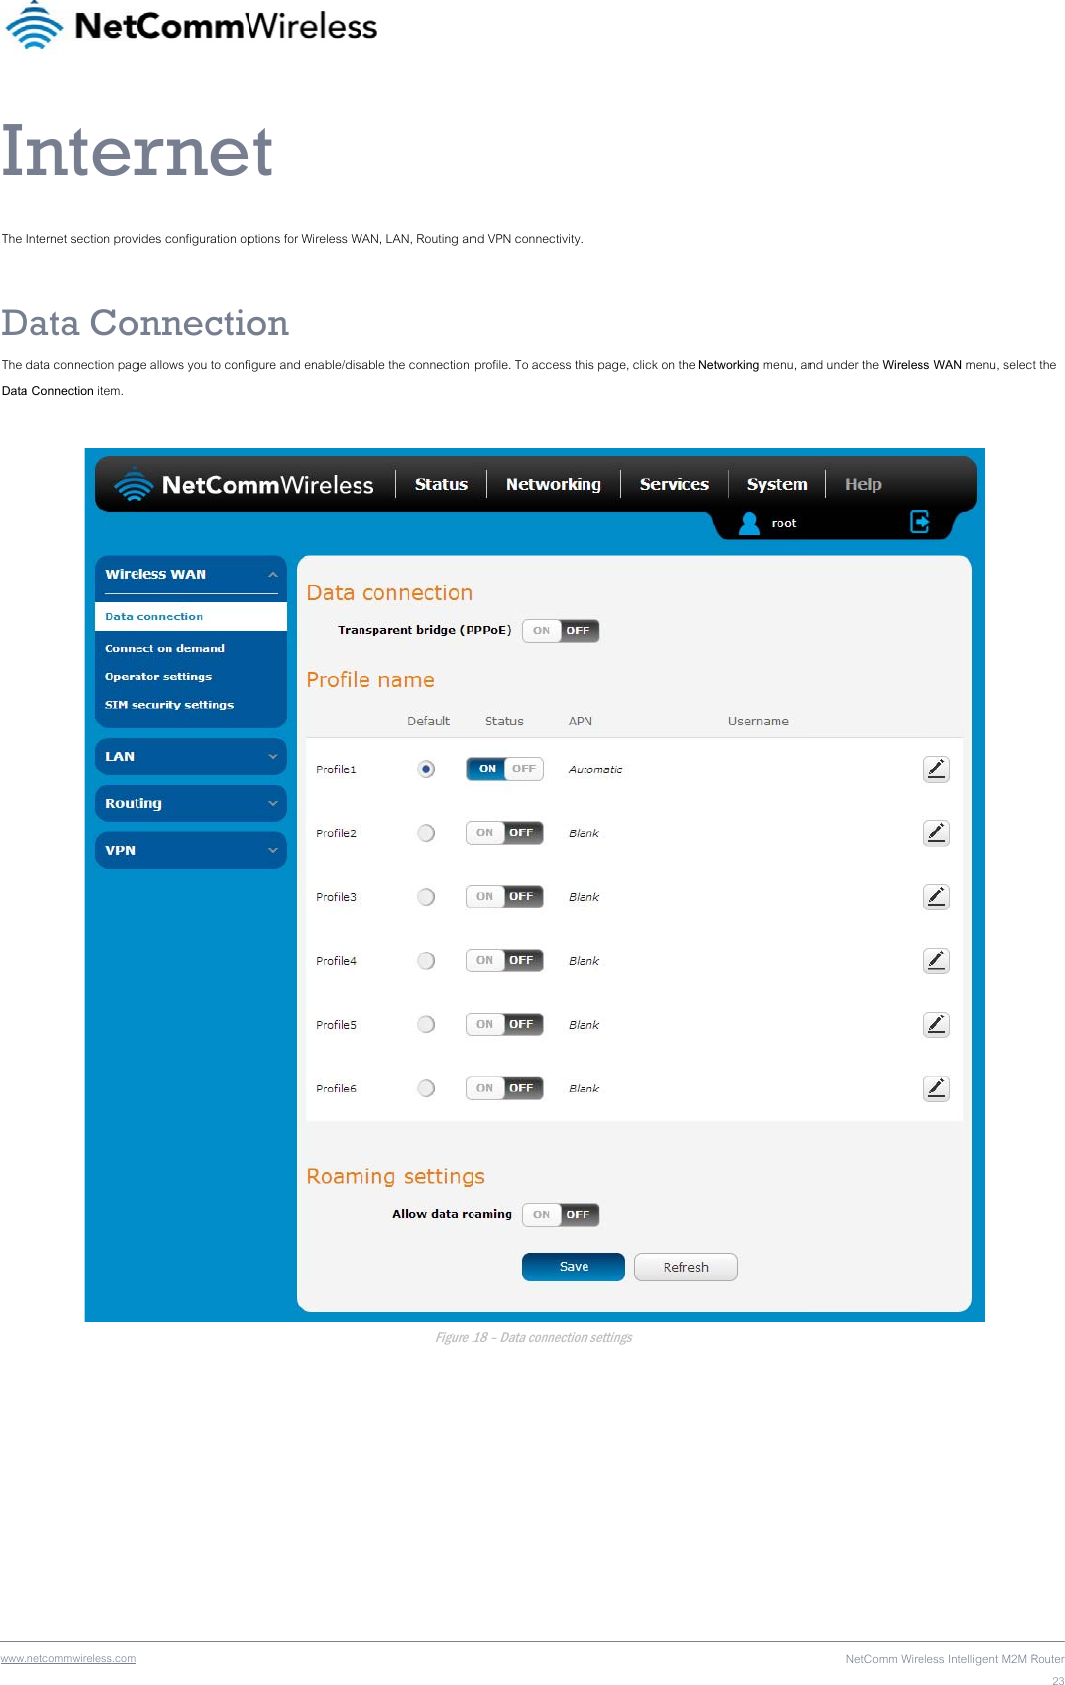 wwwIThe DThe Data .netcommwireless.com nterInternet section provData Codata connection paga Connection item.  rnevides configuration oponnectioge allows you to conft ptions for Wireless Won igure and enable/dis WAN, LAN, Routing anable the connection Figure 1nd VPN connectivity.  profile. To access th18 – Data connection is page, click on the n settings  Networking menu, anNetComm Wirend under the Wireleseless Intelligent M2M Rss WAN menu, select Router23t the 